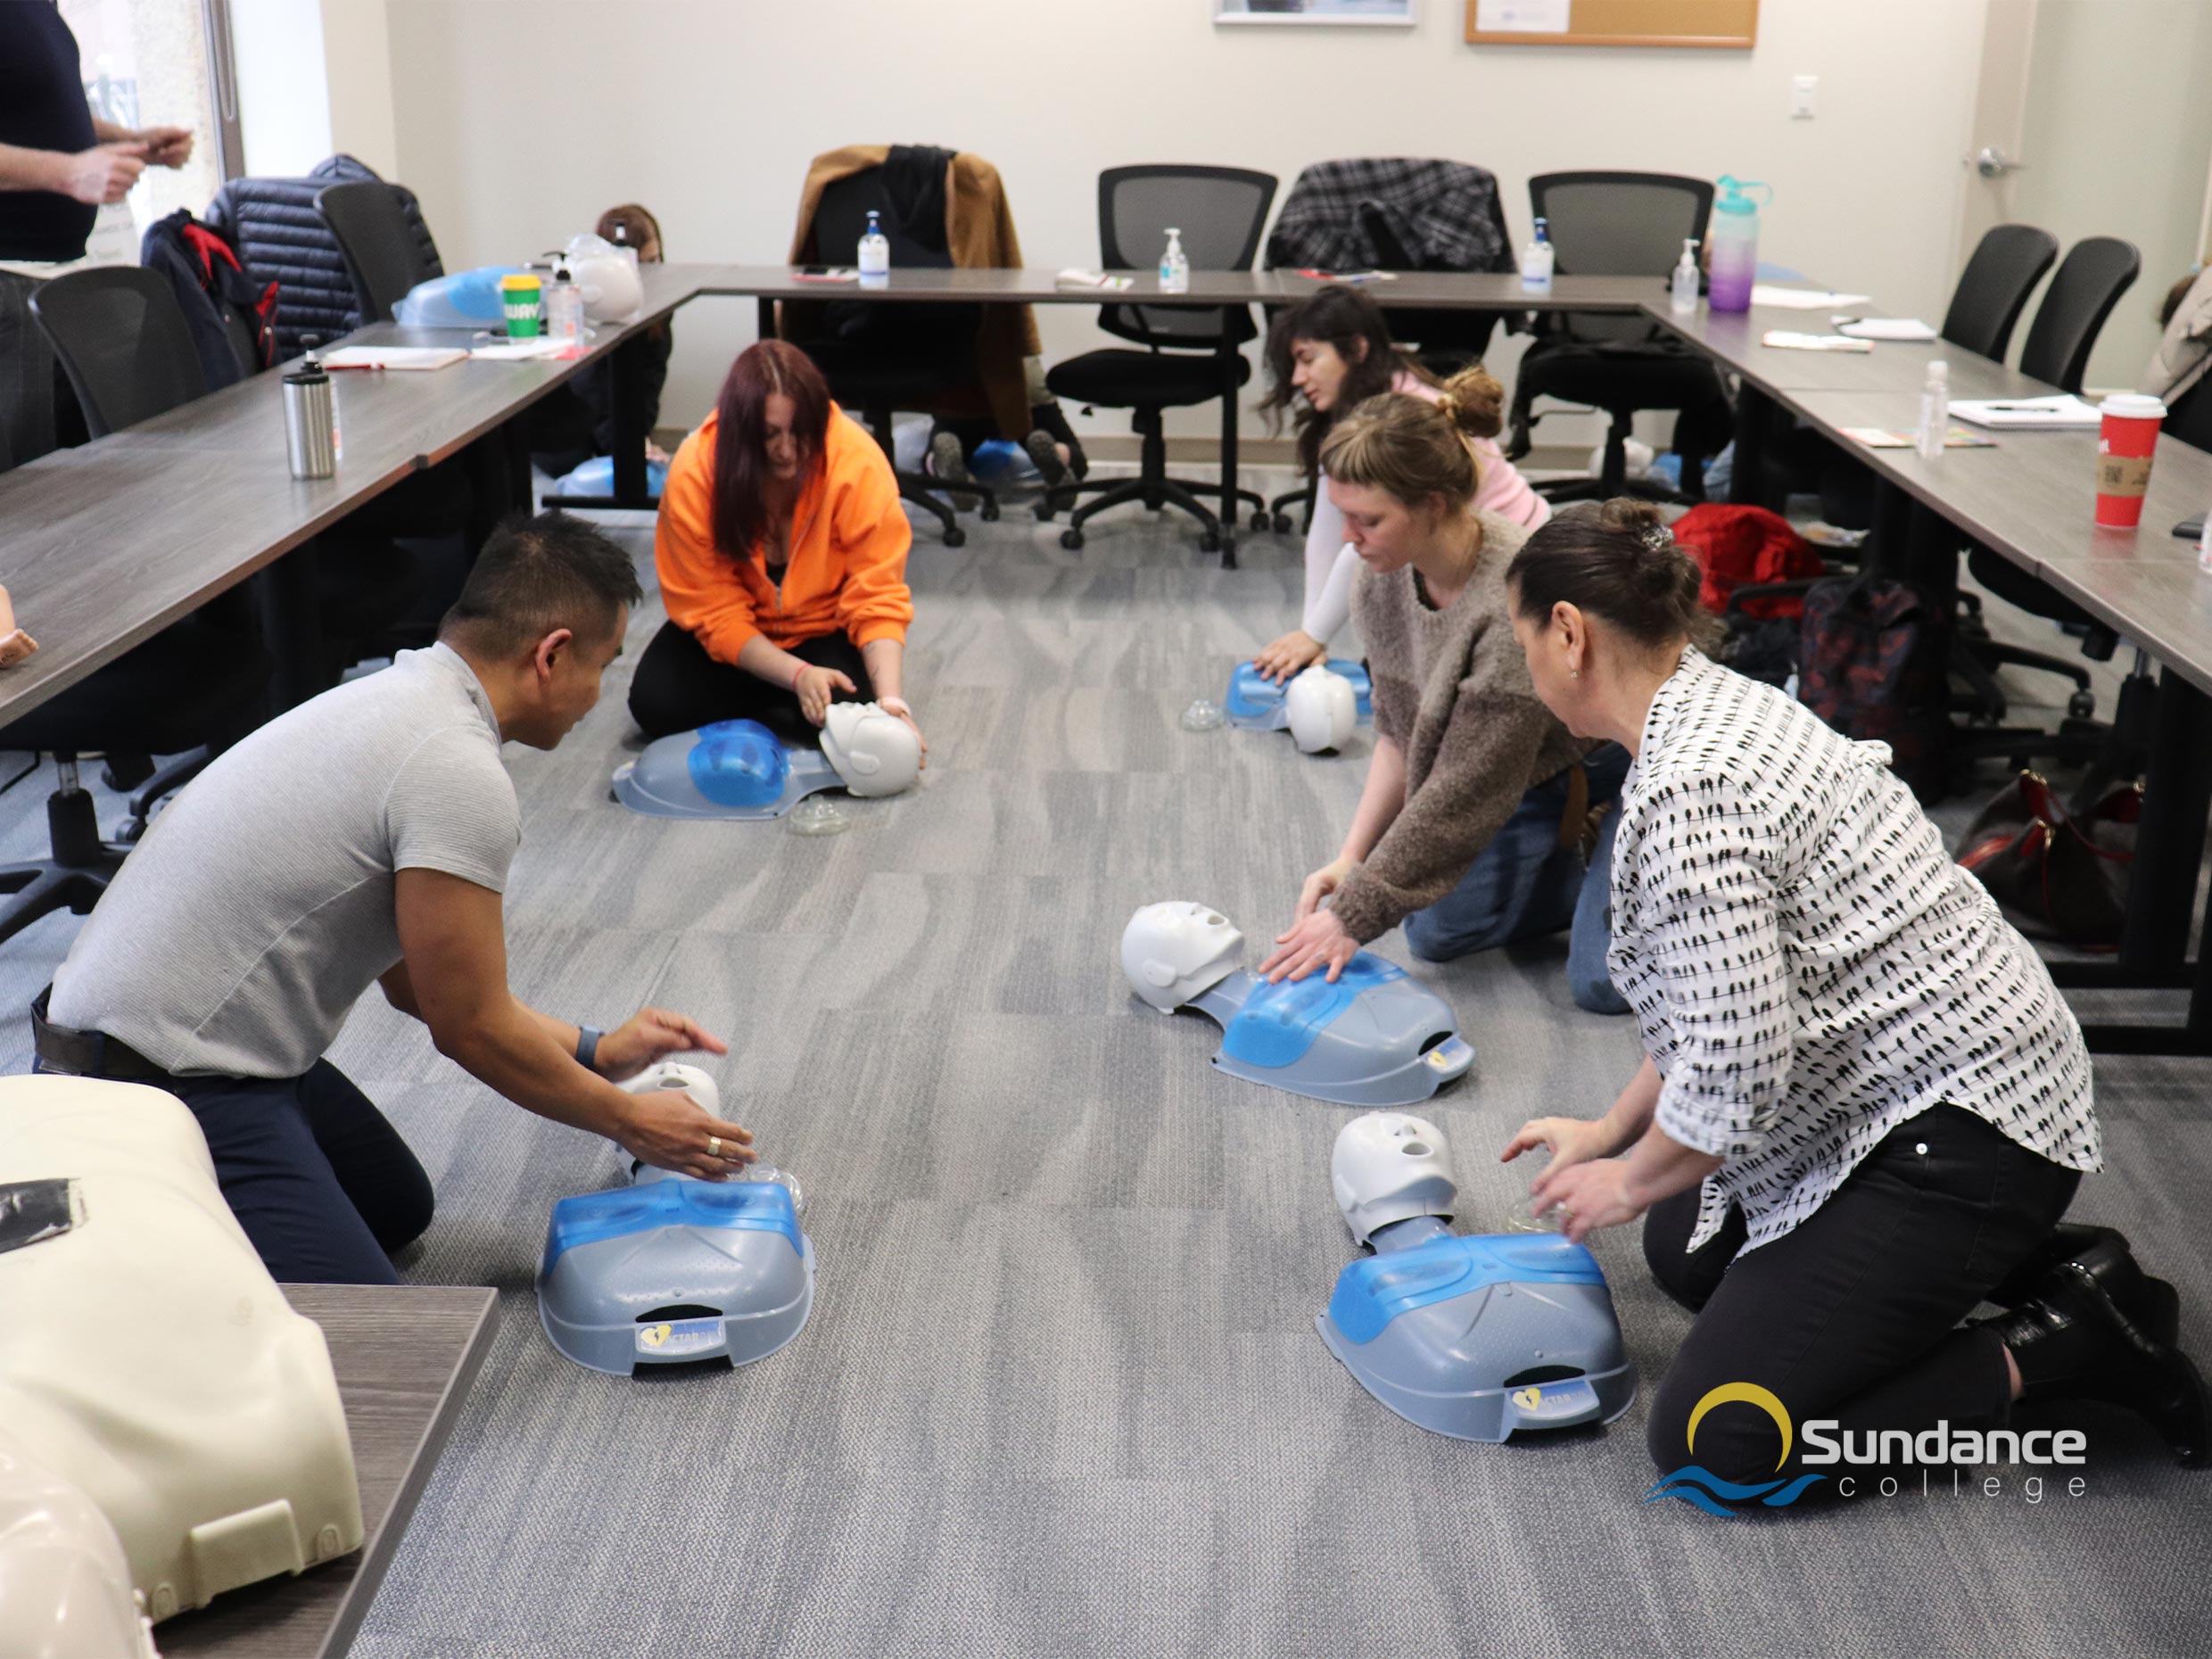 The First Aid and CPR training taking place at Sundance College's Edmoton campus.